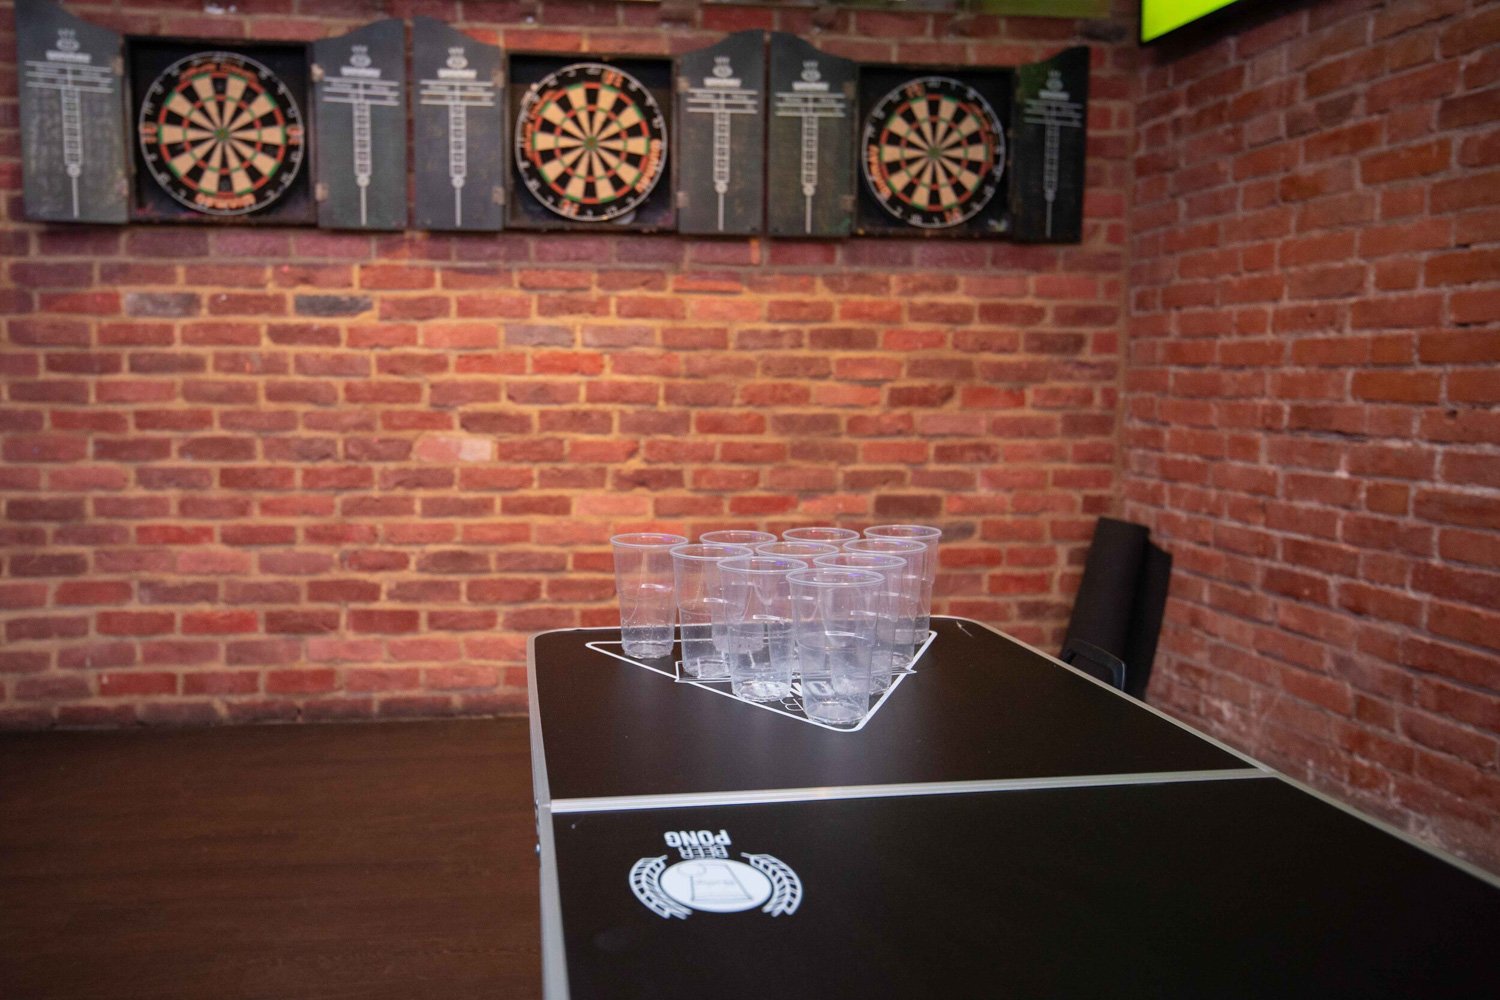 Sharkeys_Sports_Bar_Bournemouth_Live_Sports_Poole_Snooker_Table_Tennis_VIP_Rooms_Consoles-13.jpg